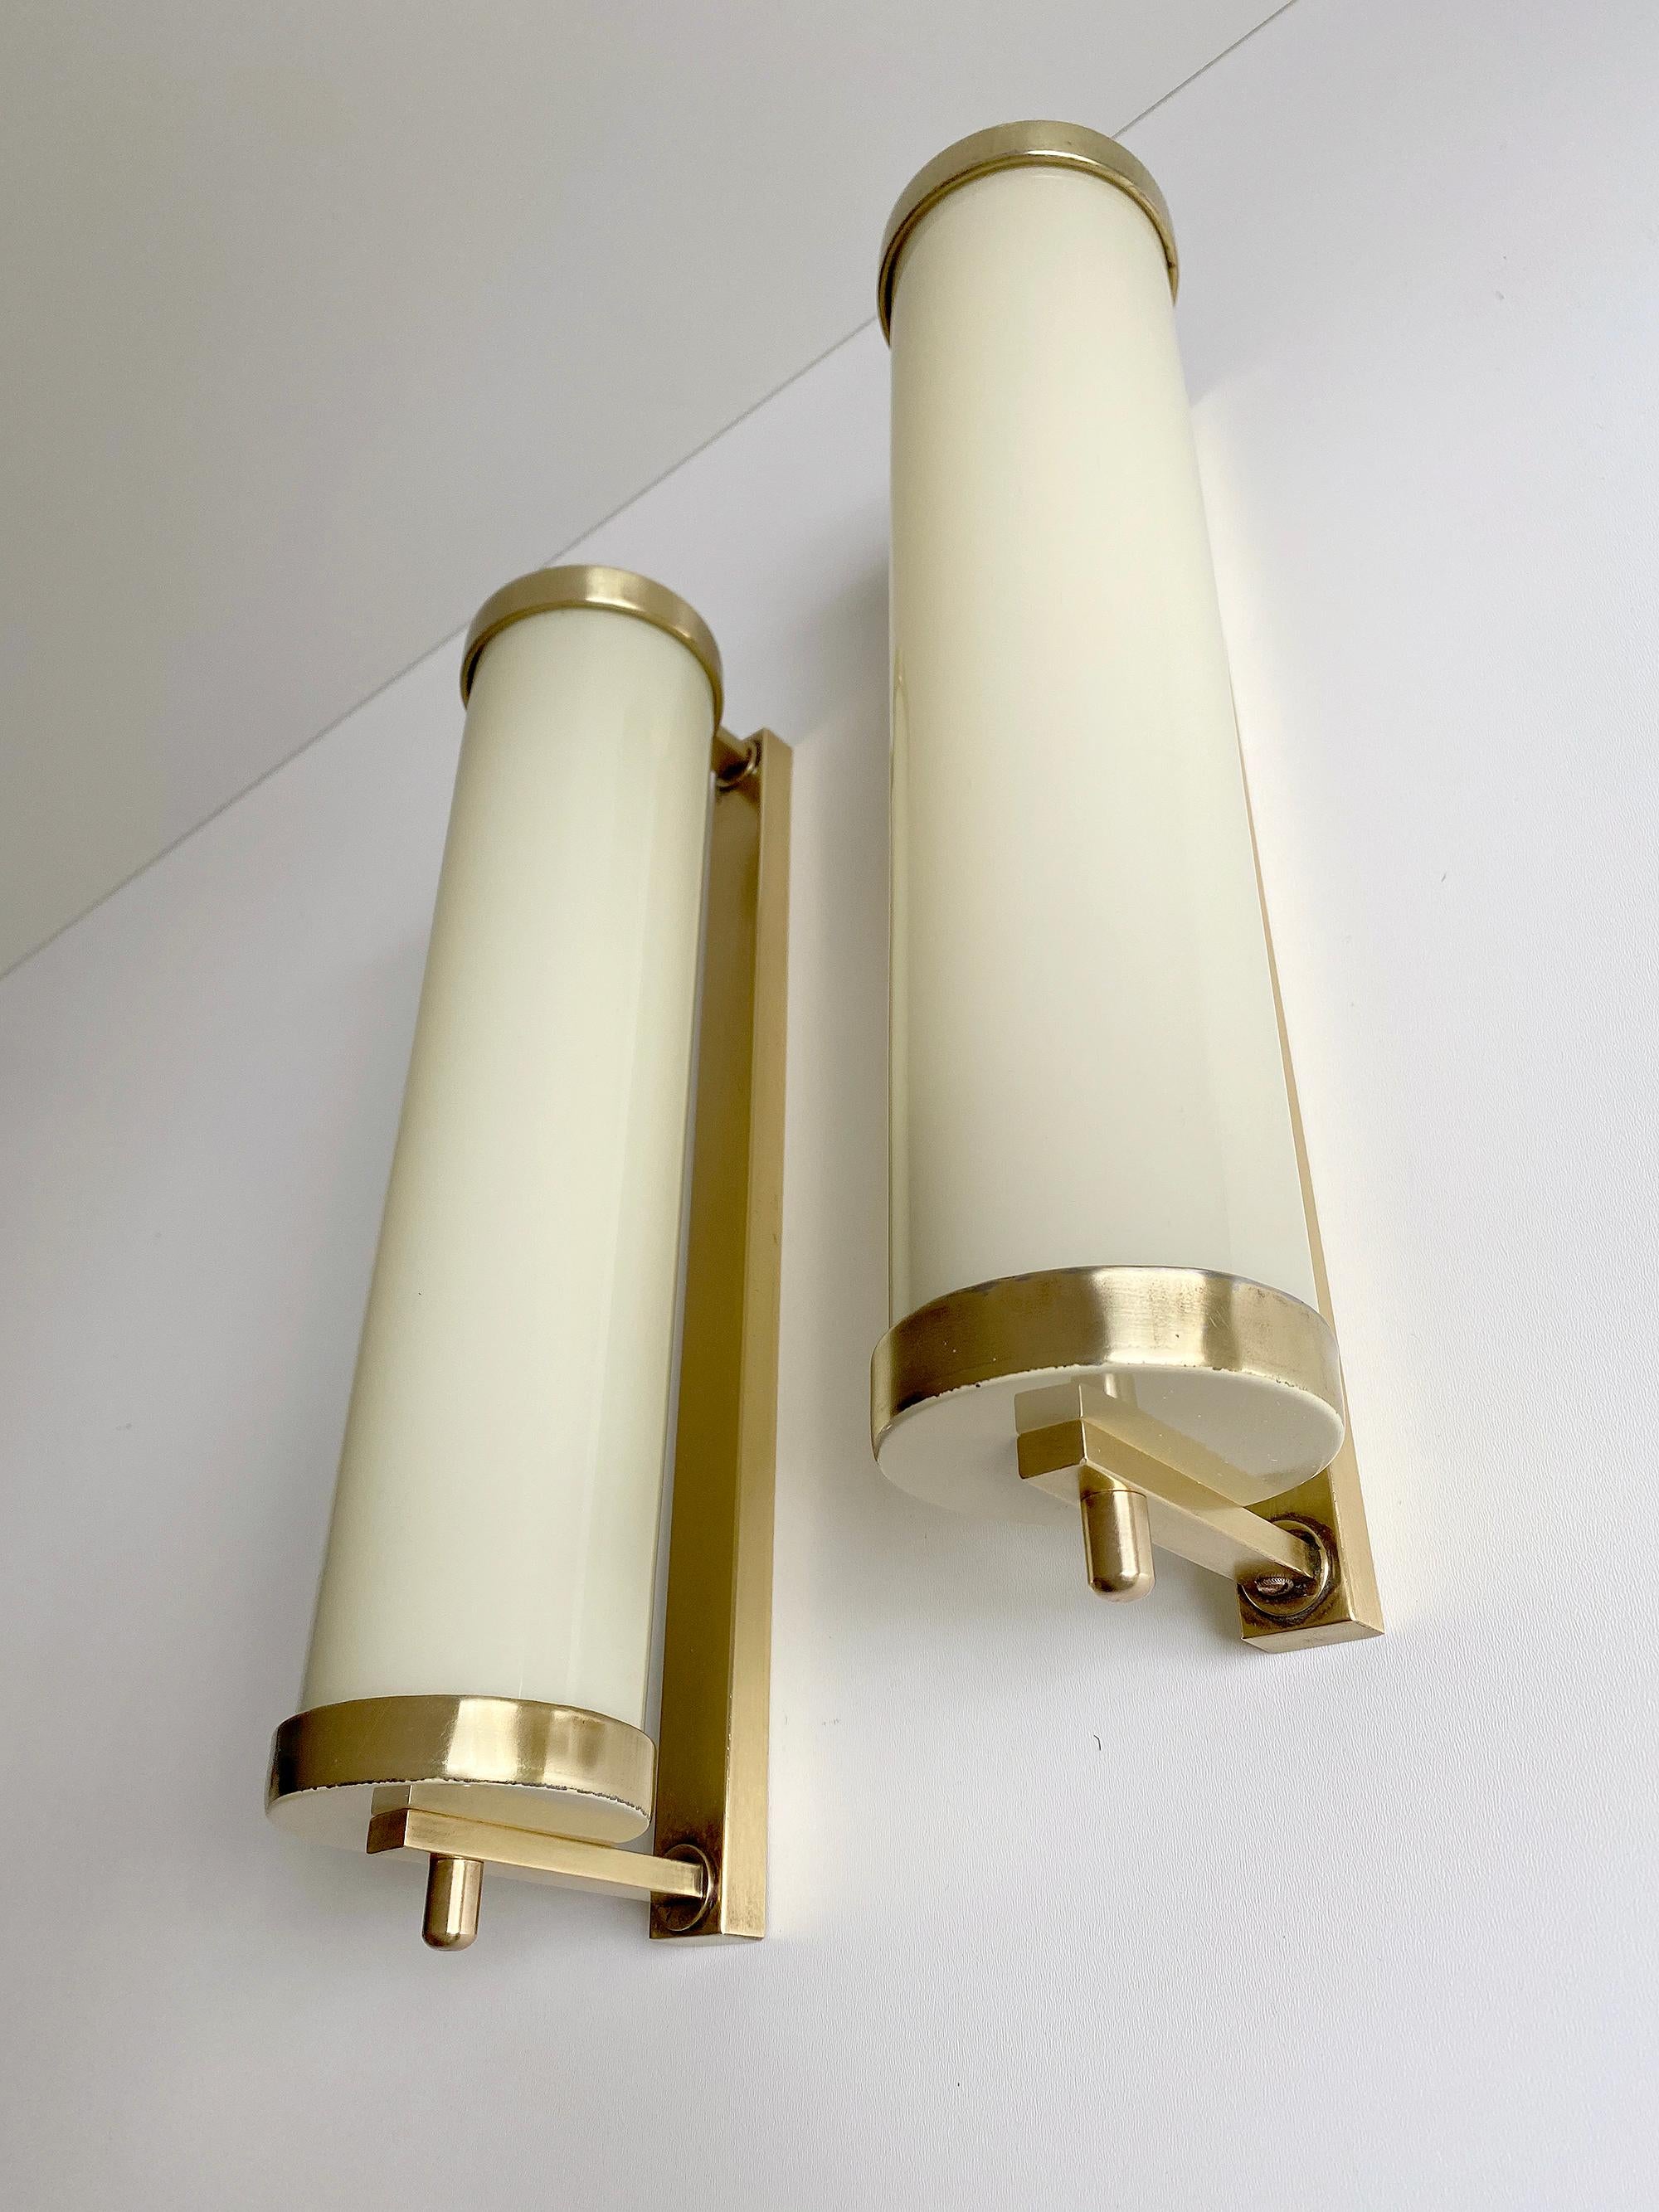 Pair of Large 1930s Art Deco Bauhaus Sconces, Brass and Glass For Sale 1